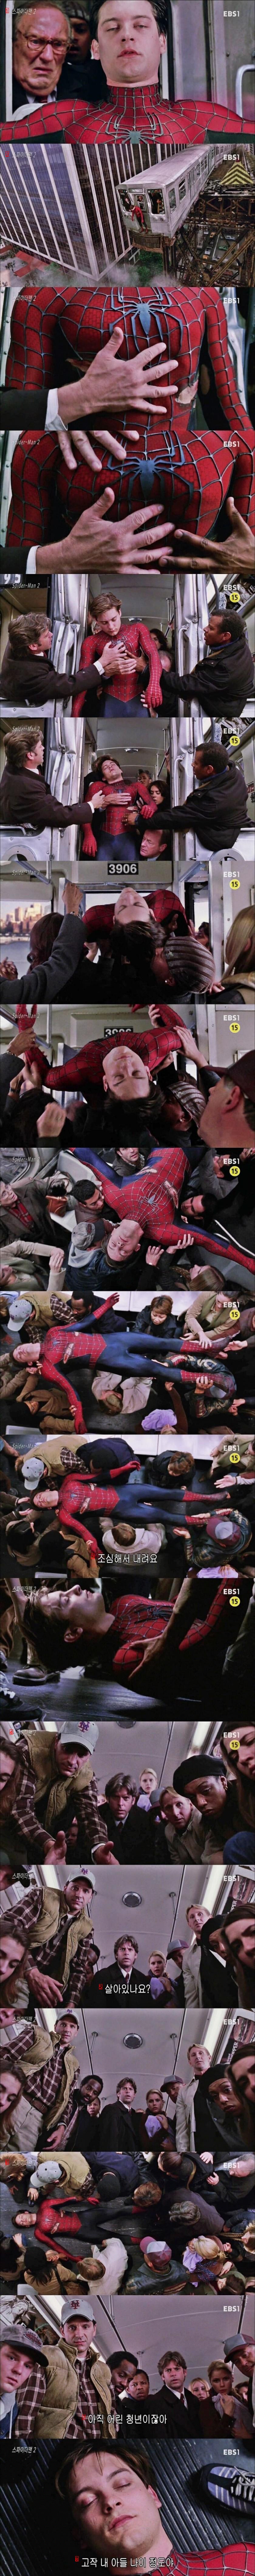 Why Sam Raimie's Spider-Man 2 Is One of Marvel's Greatest Stories